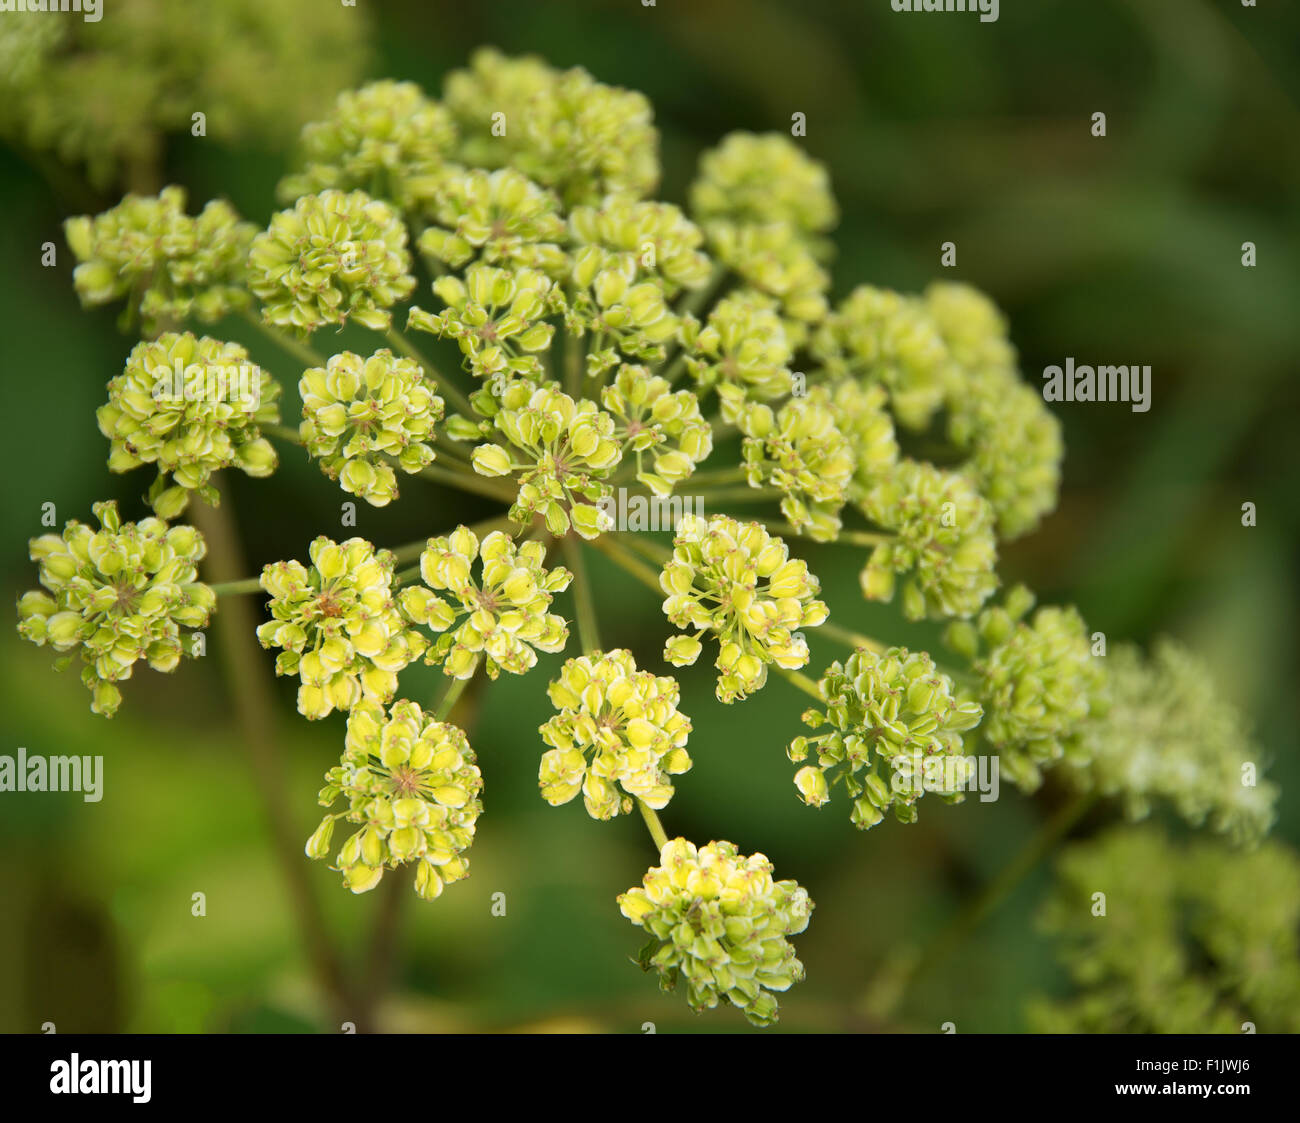 detail of a Apium flower in green ambiance Stock Photo